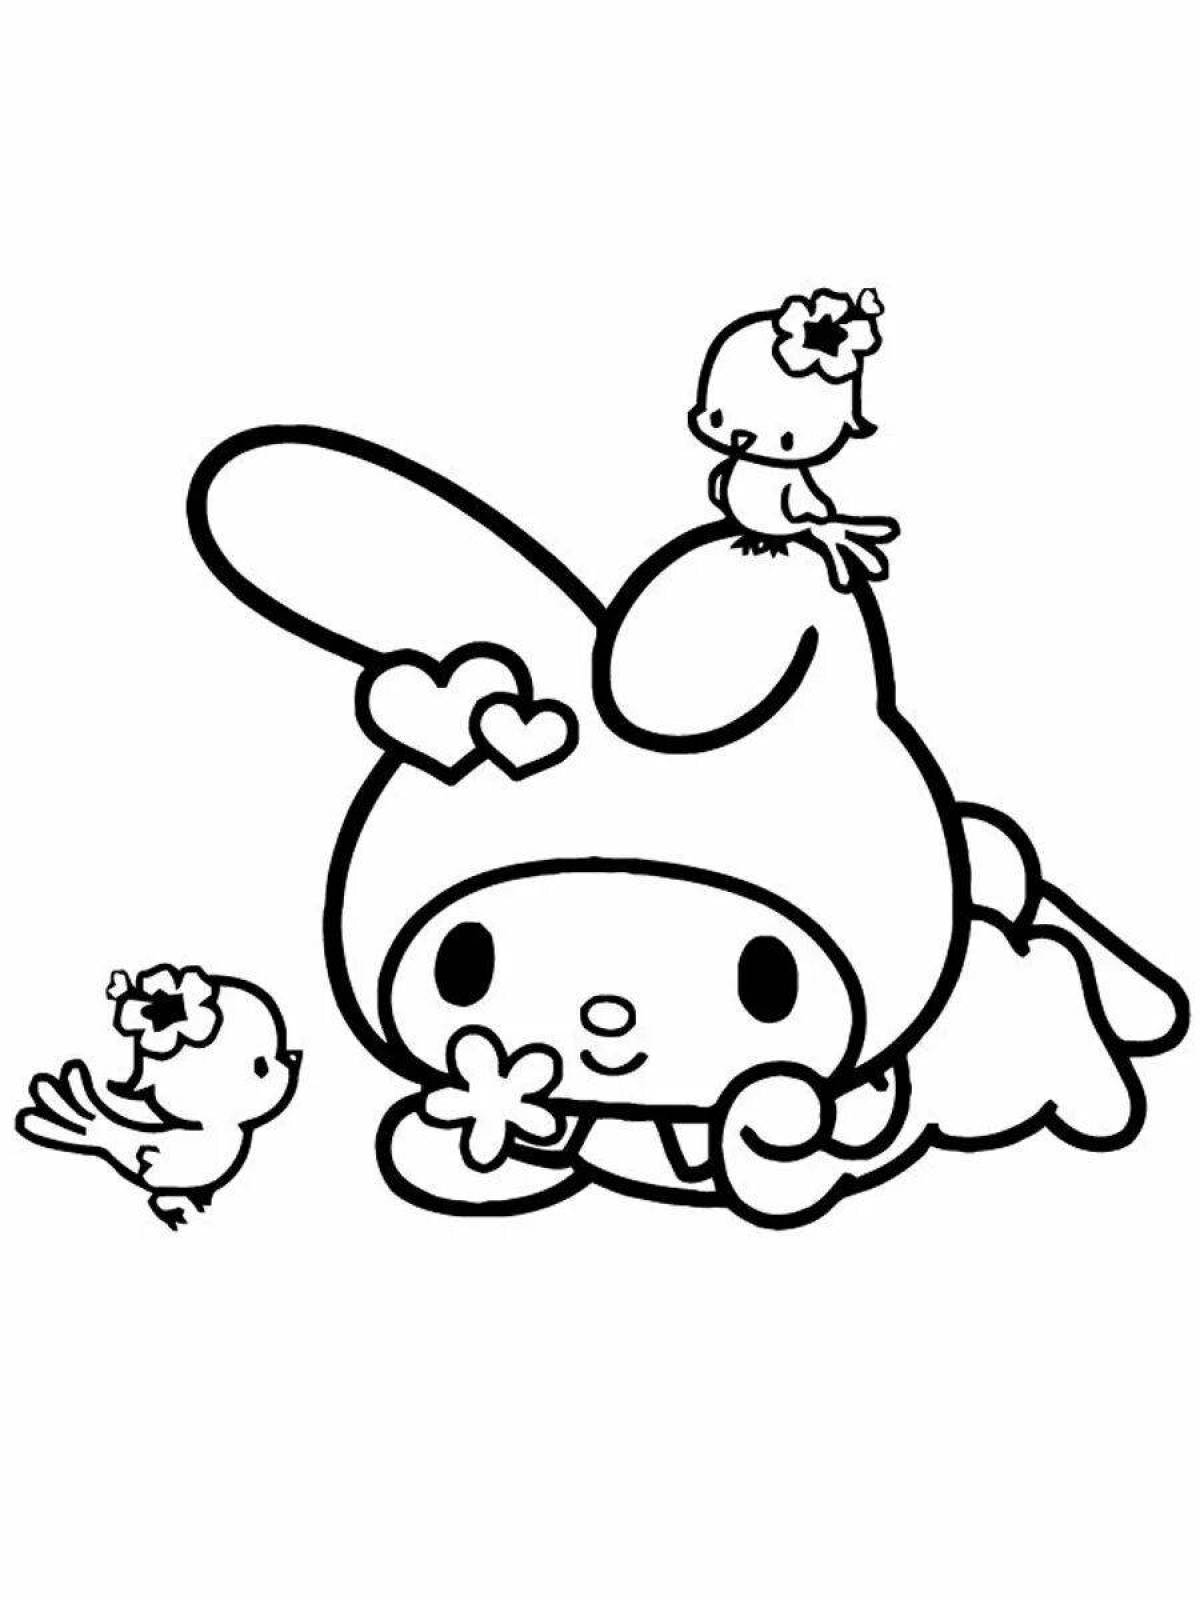 Exciting May melody hello kitty coloring page